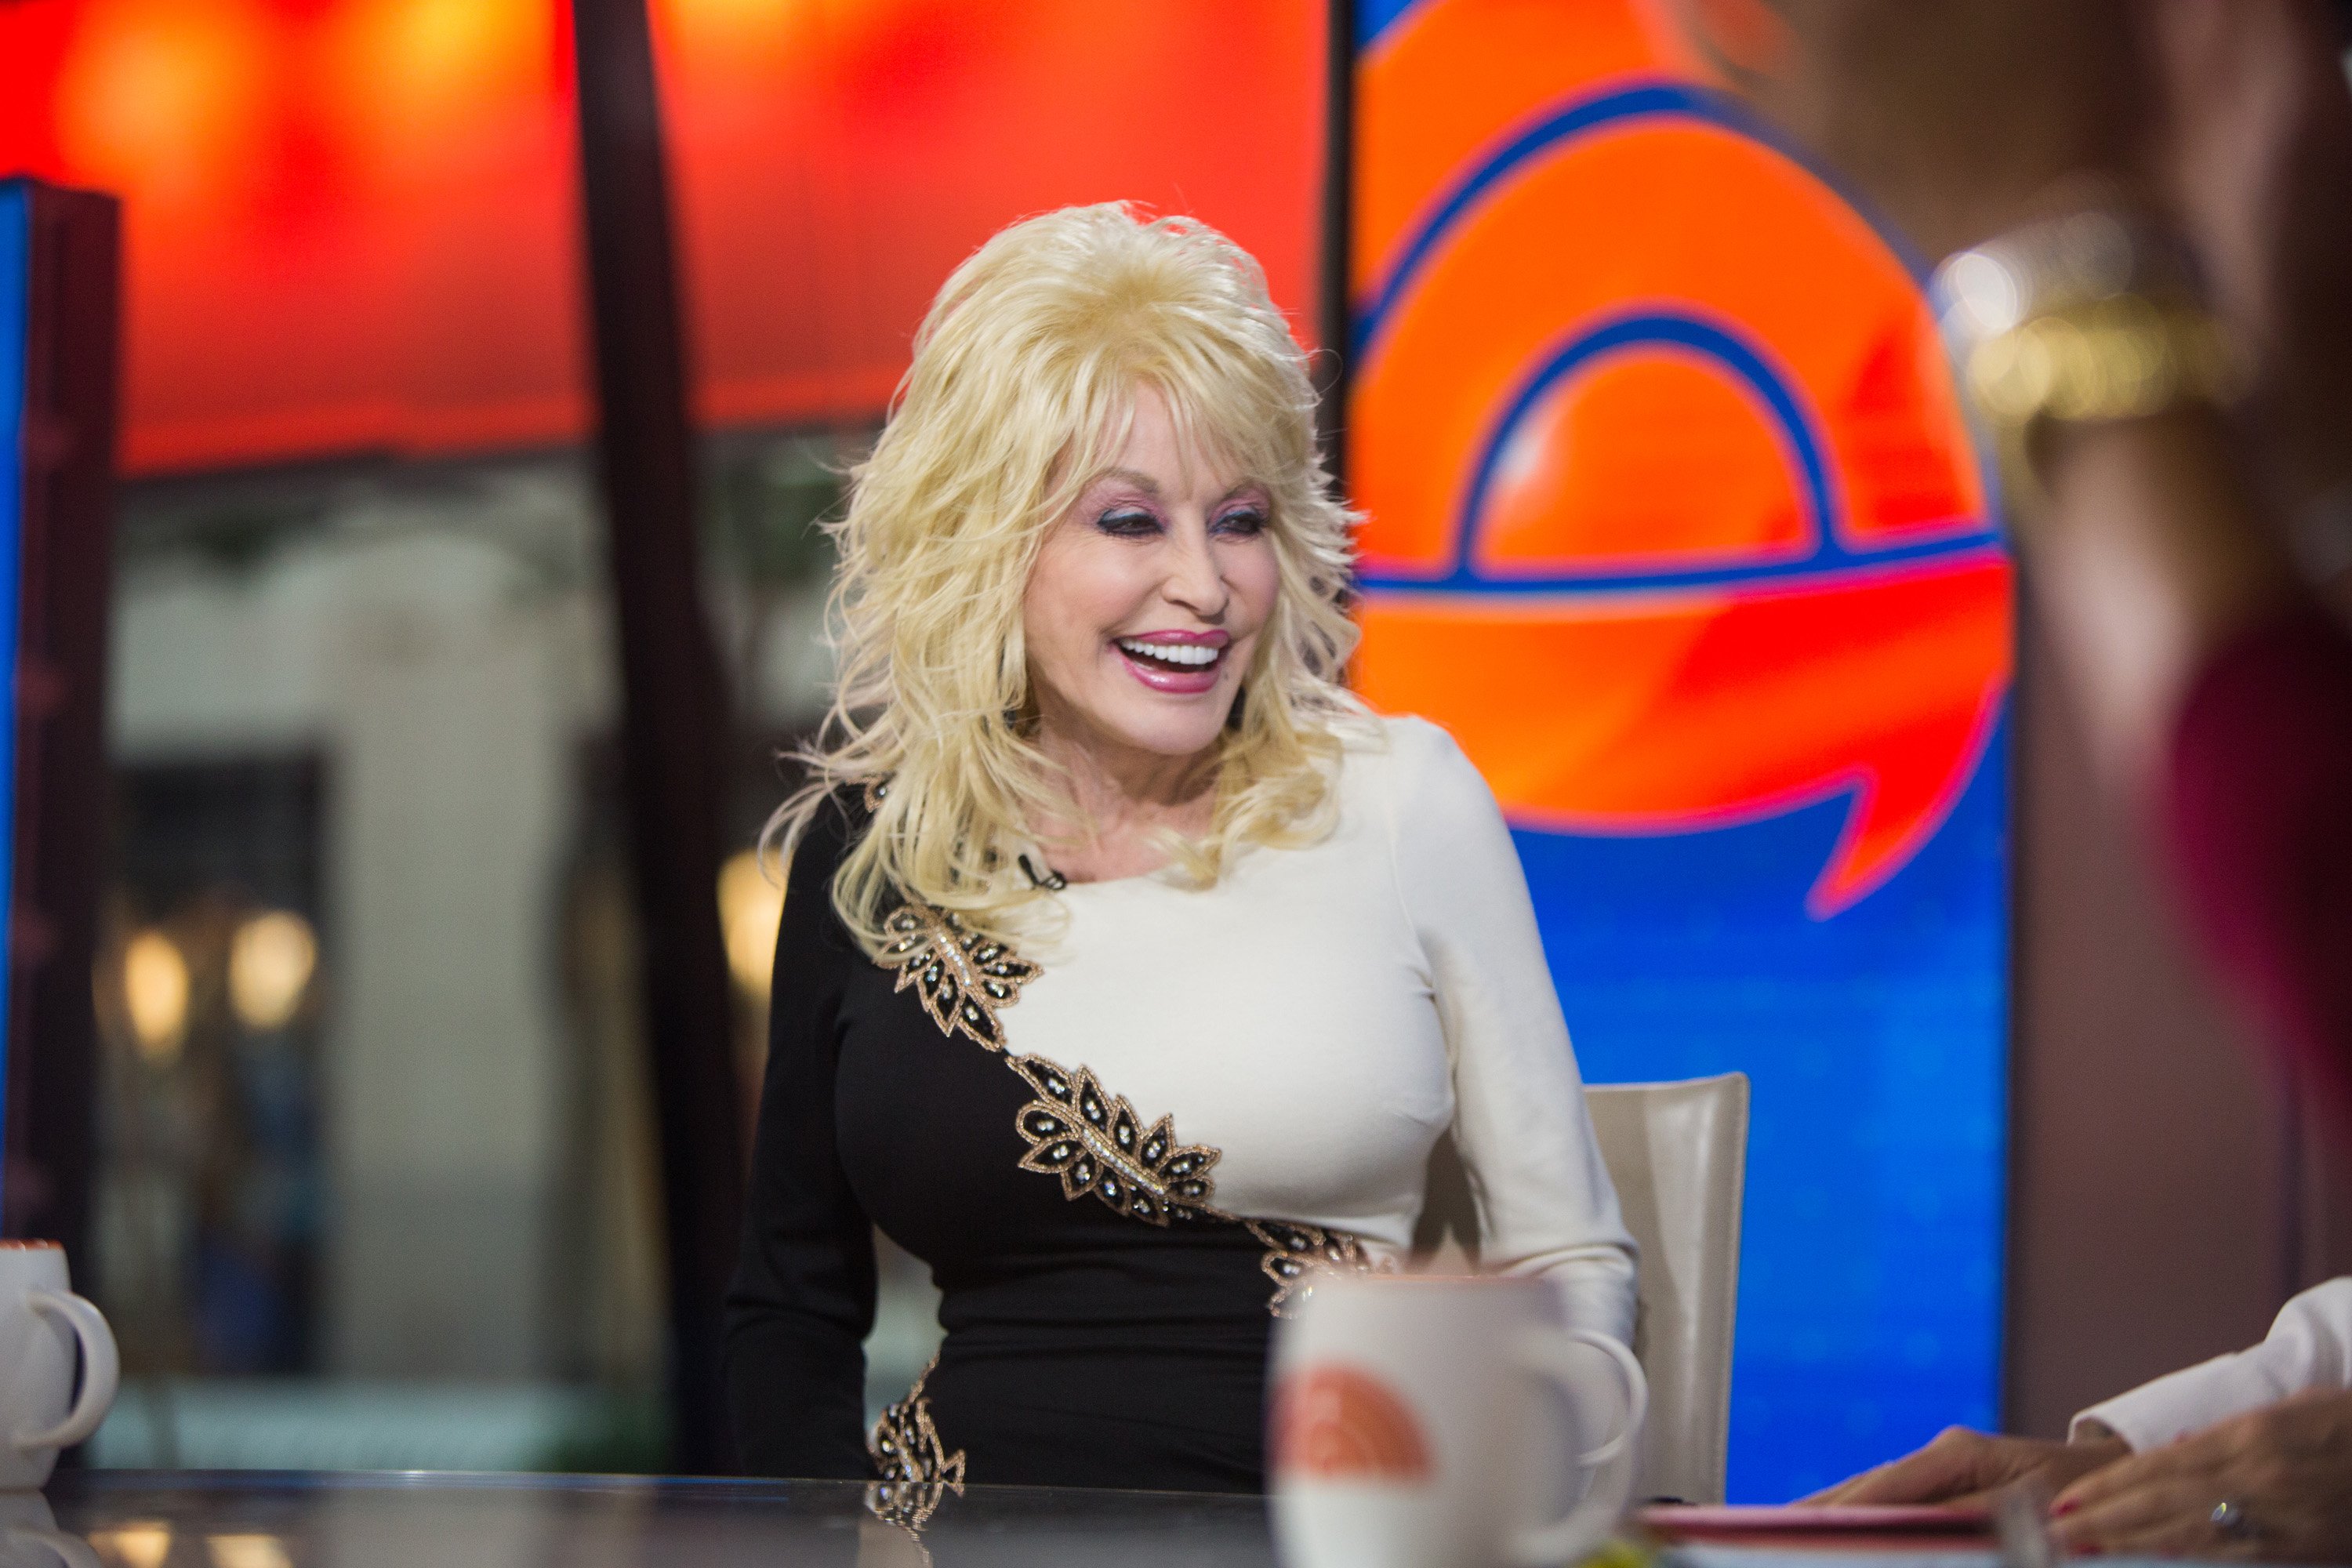 Dolly Parton laughing on the set of the 'Today' show